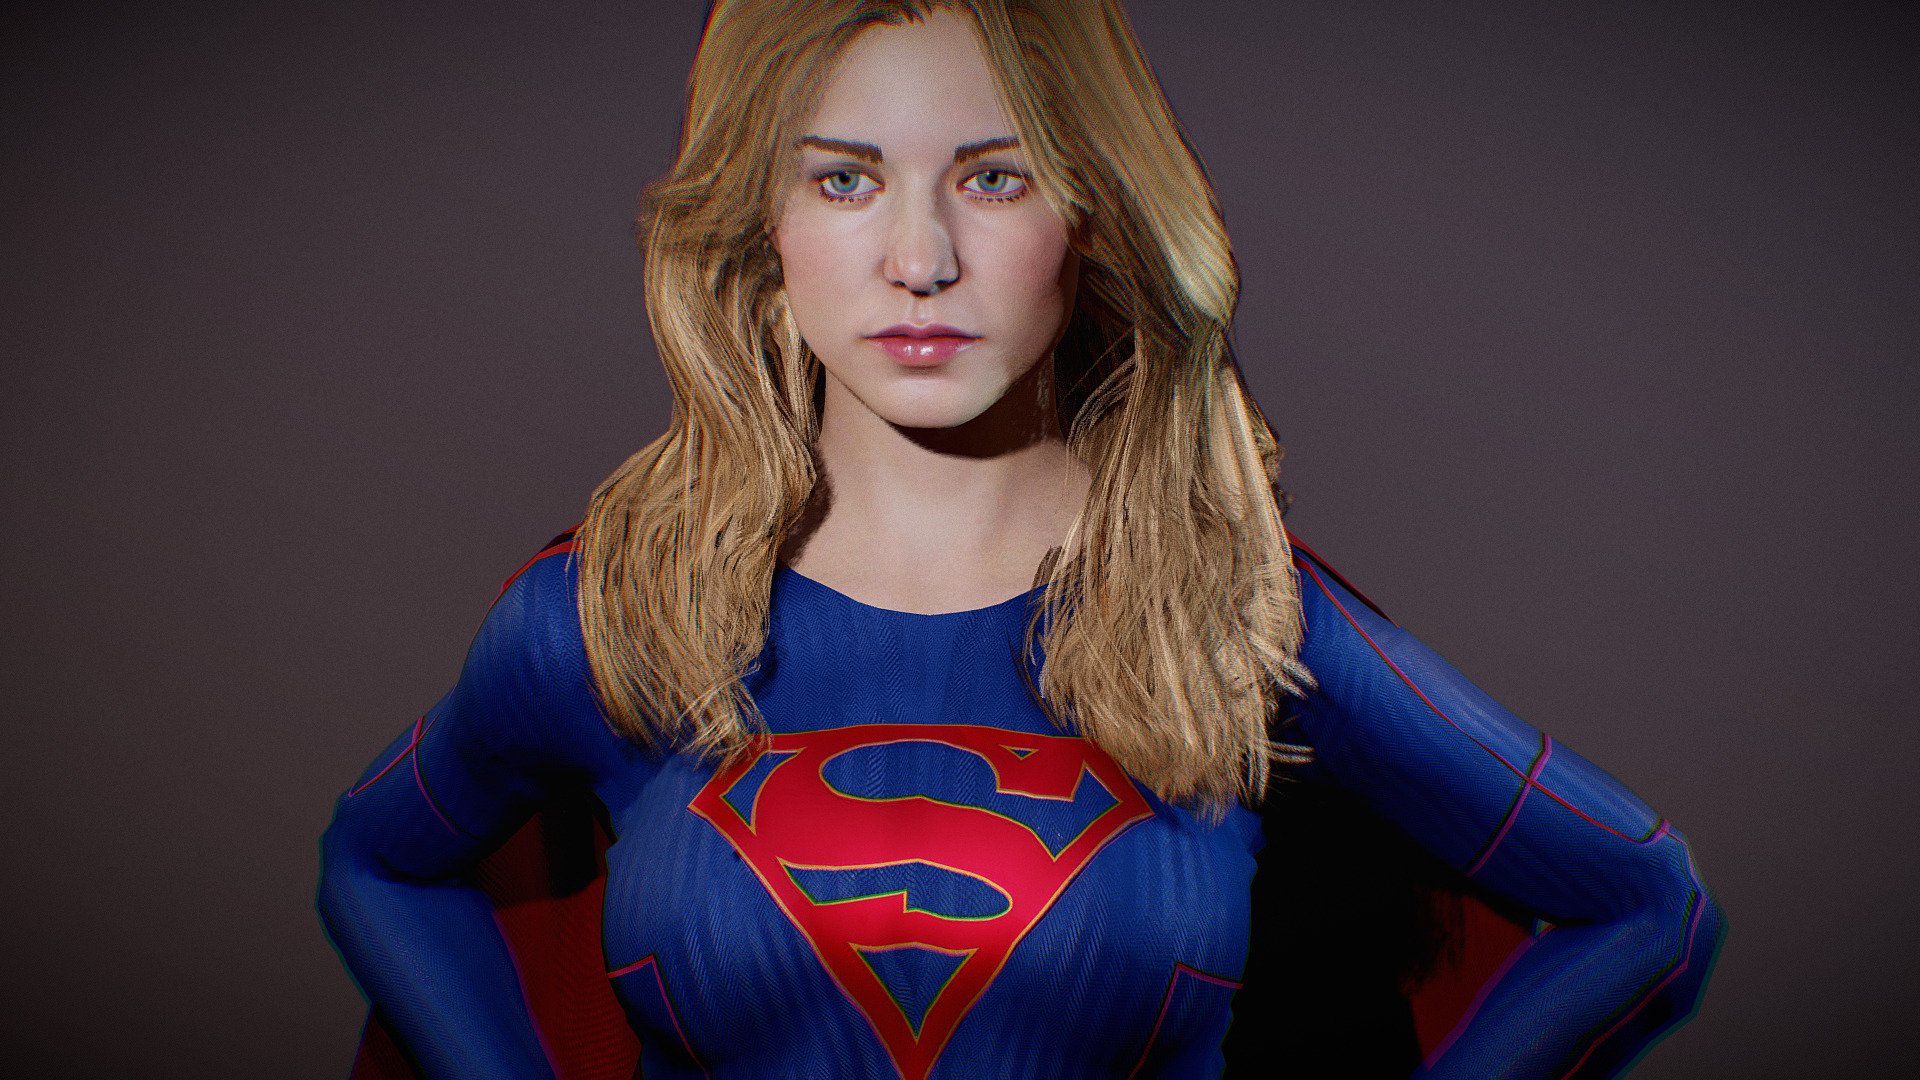 * PLEASE DOWNLOAD THE RAR INSIDE THE ADDITIONAL FILES!!!
Female Super Girl , includes 1 more shapekey for body muscles extremely toned/buffed. Model in Blender file. Fully rigged. SSS subsurface scattering. mixamo bone names for animation. No FBX or OBJ format, only Blend file 3d model